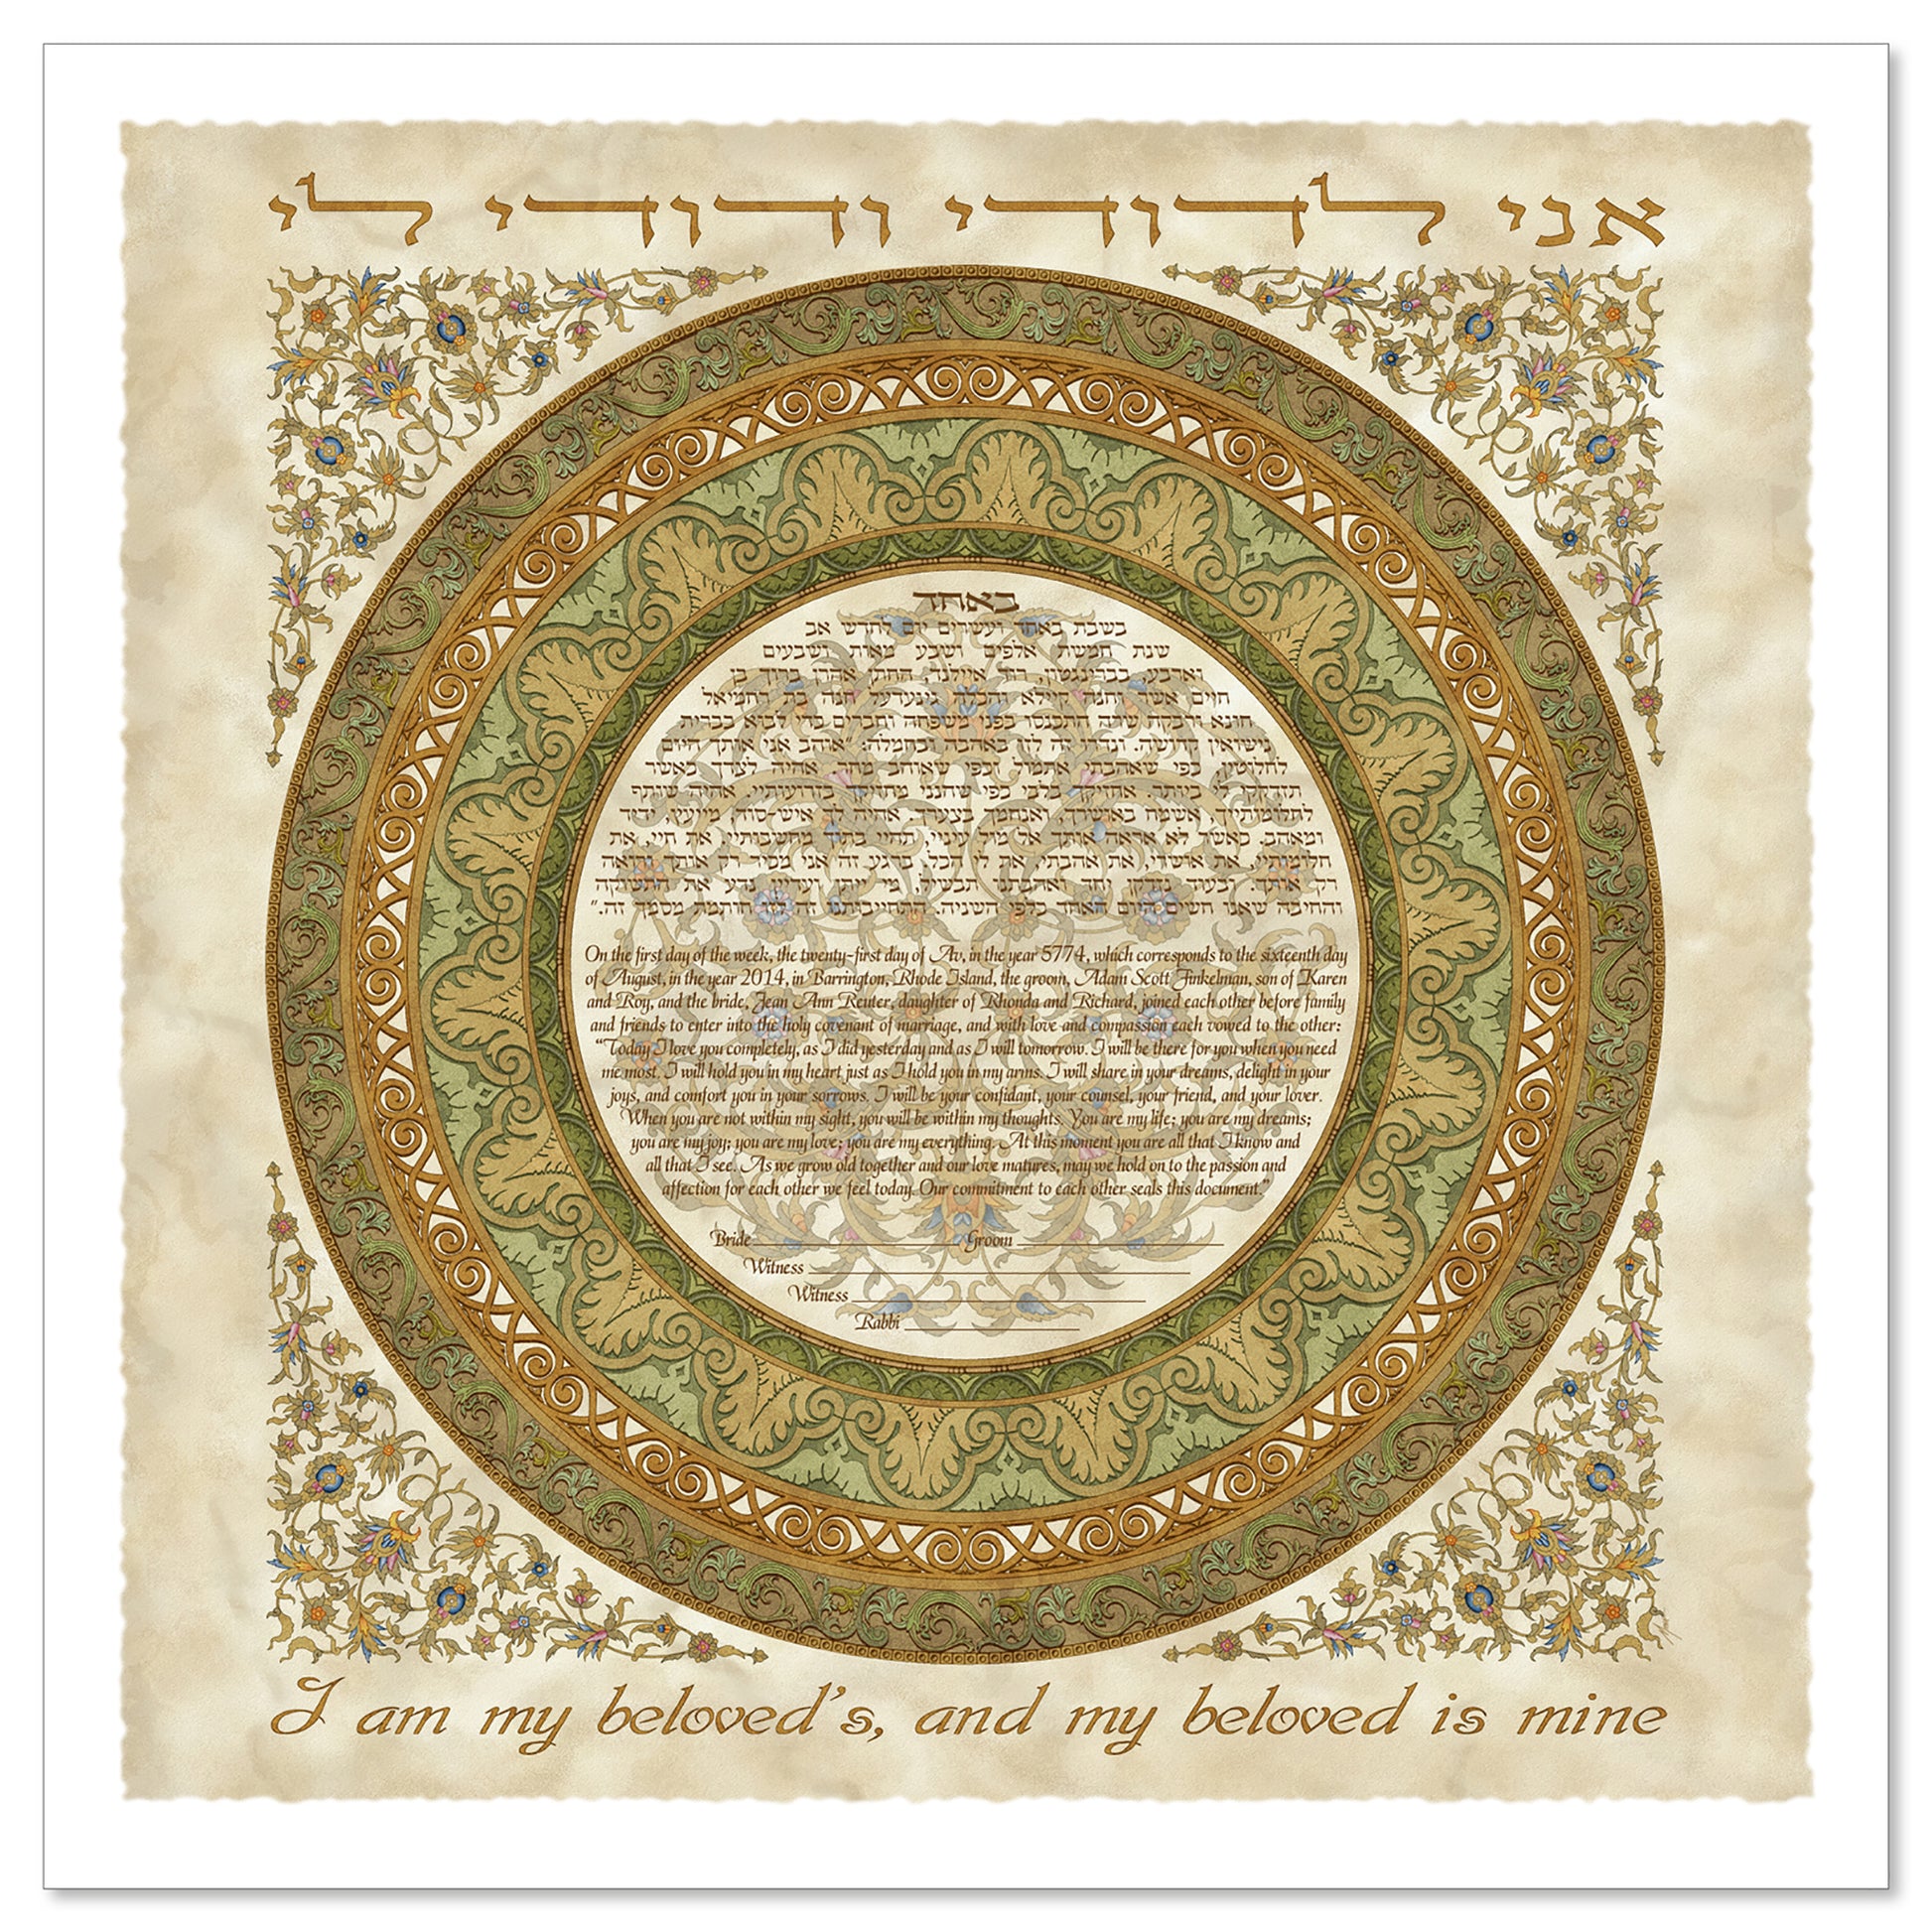 My Love's Ring 2 Brown/Parchment ketubah by Micah Parker with the phrase, "I am my beloved's, and my beloved is mine," in Hebrew and English featuring a circular text surrounded by a ring in shades of brown on a parchment background.